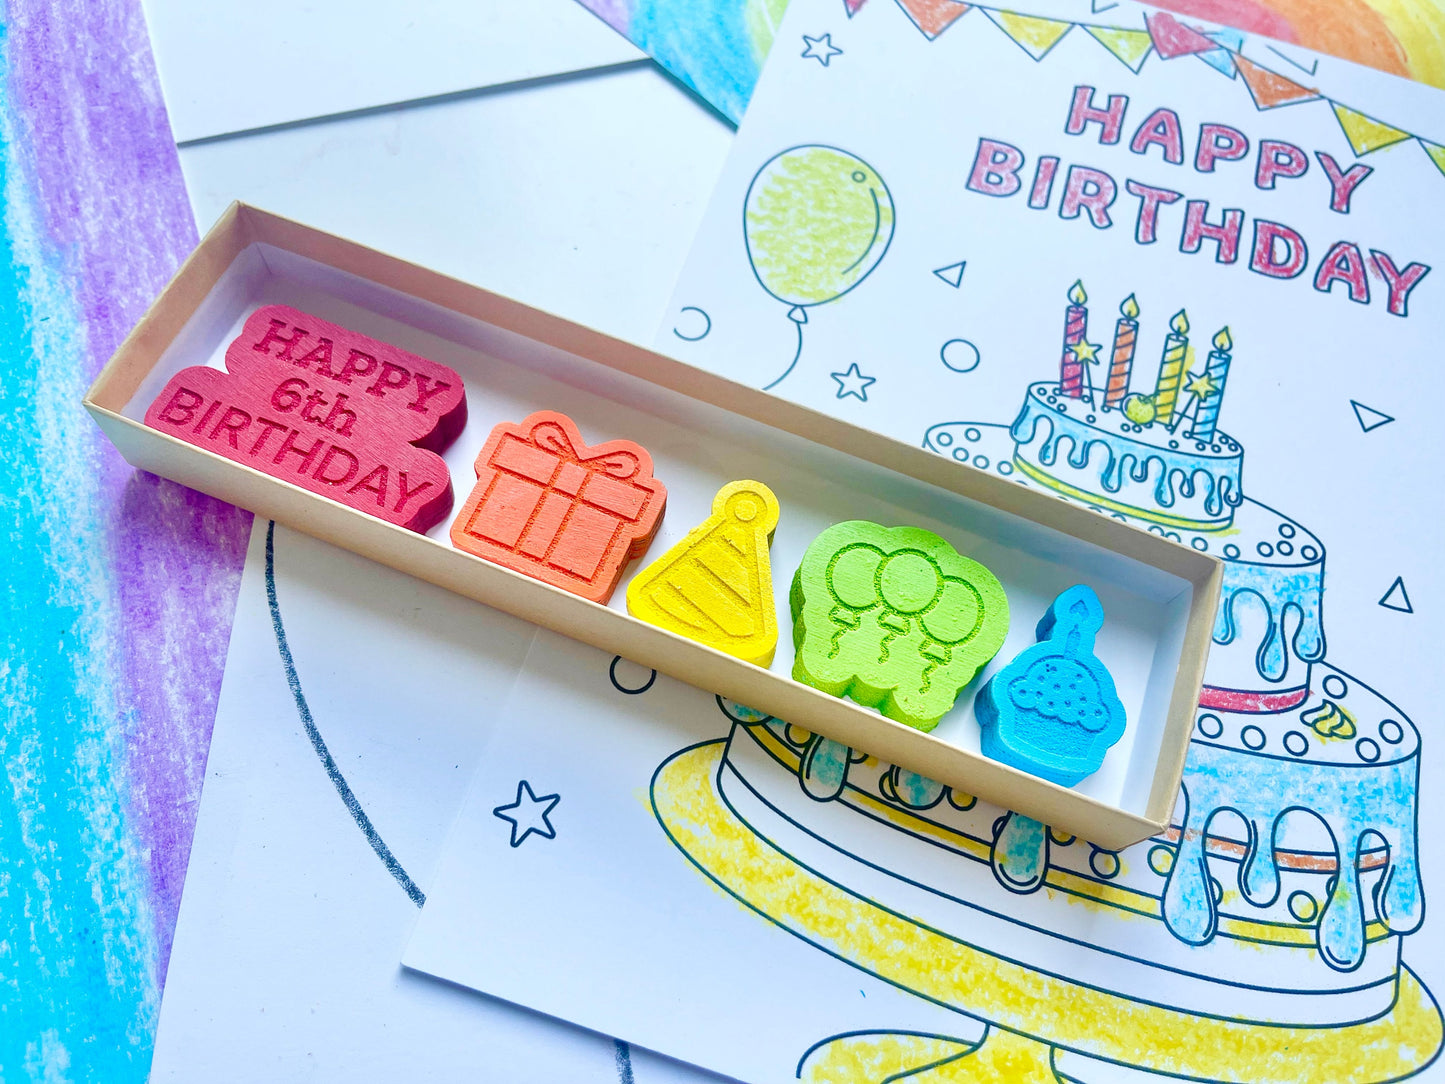 6th Birthday Crayons - 6th Birthday Gifts - Kids Happy Birthday Gifts - Kids Birthday Presents - Gifts For Kids - 6th Birthday Party Favors